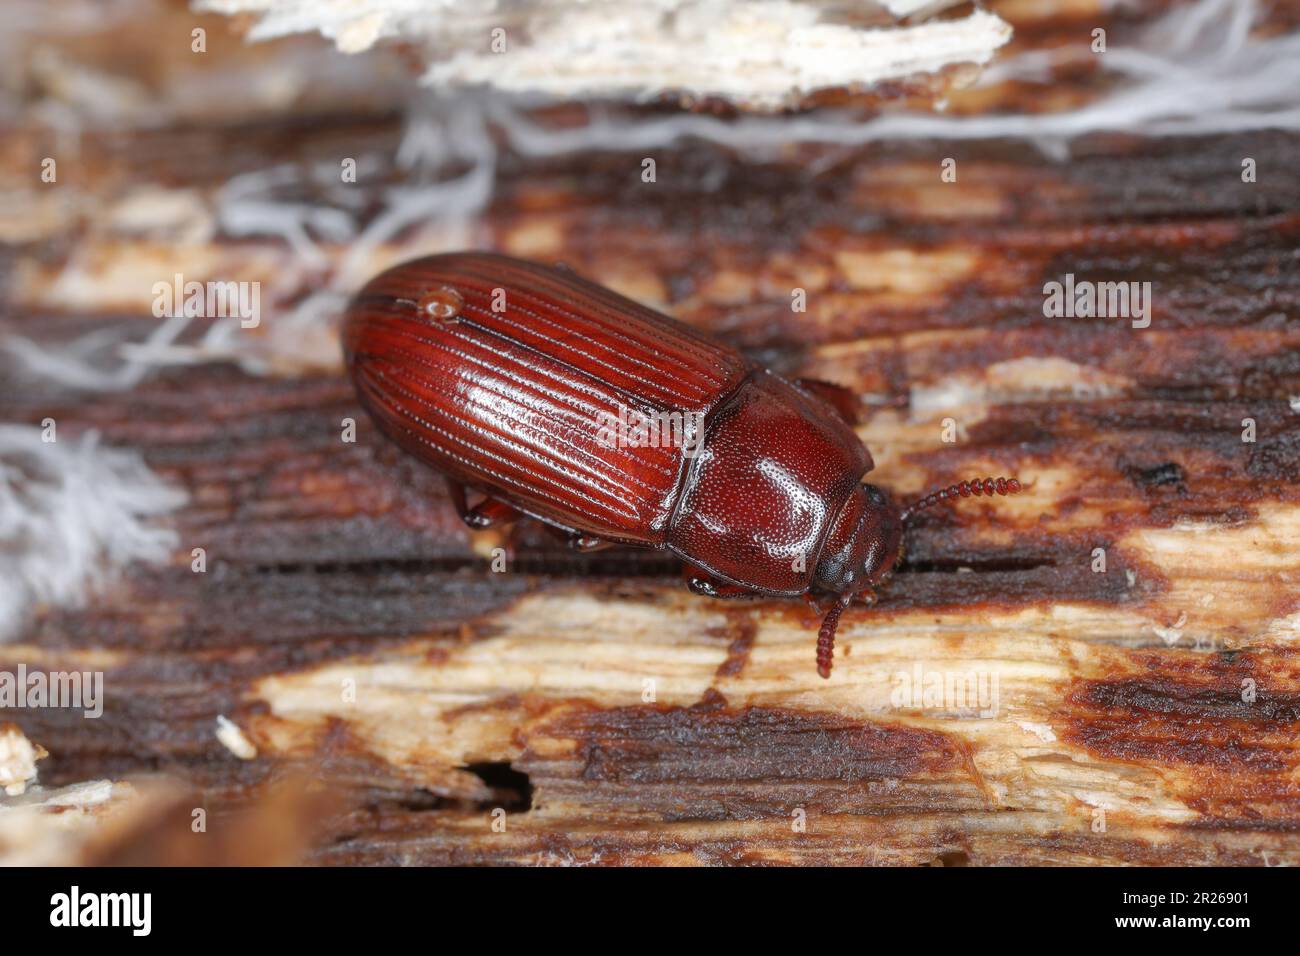 Darklling Beetle (Uloma sp.), Tenabrionidae. An insect under the bark of a decayed tree. Stock Photo